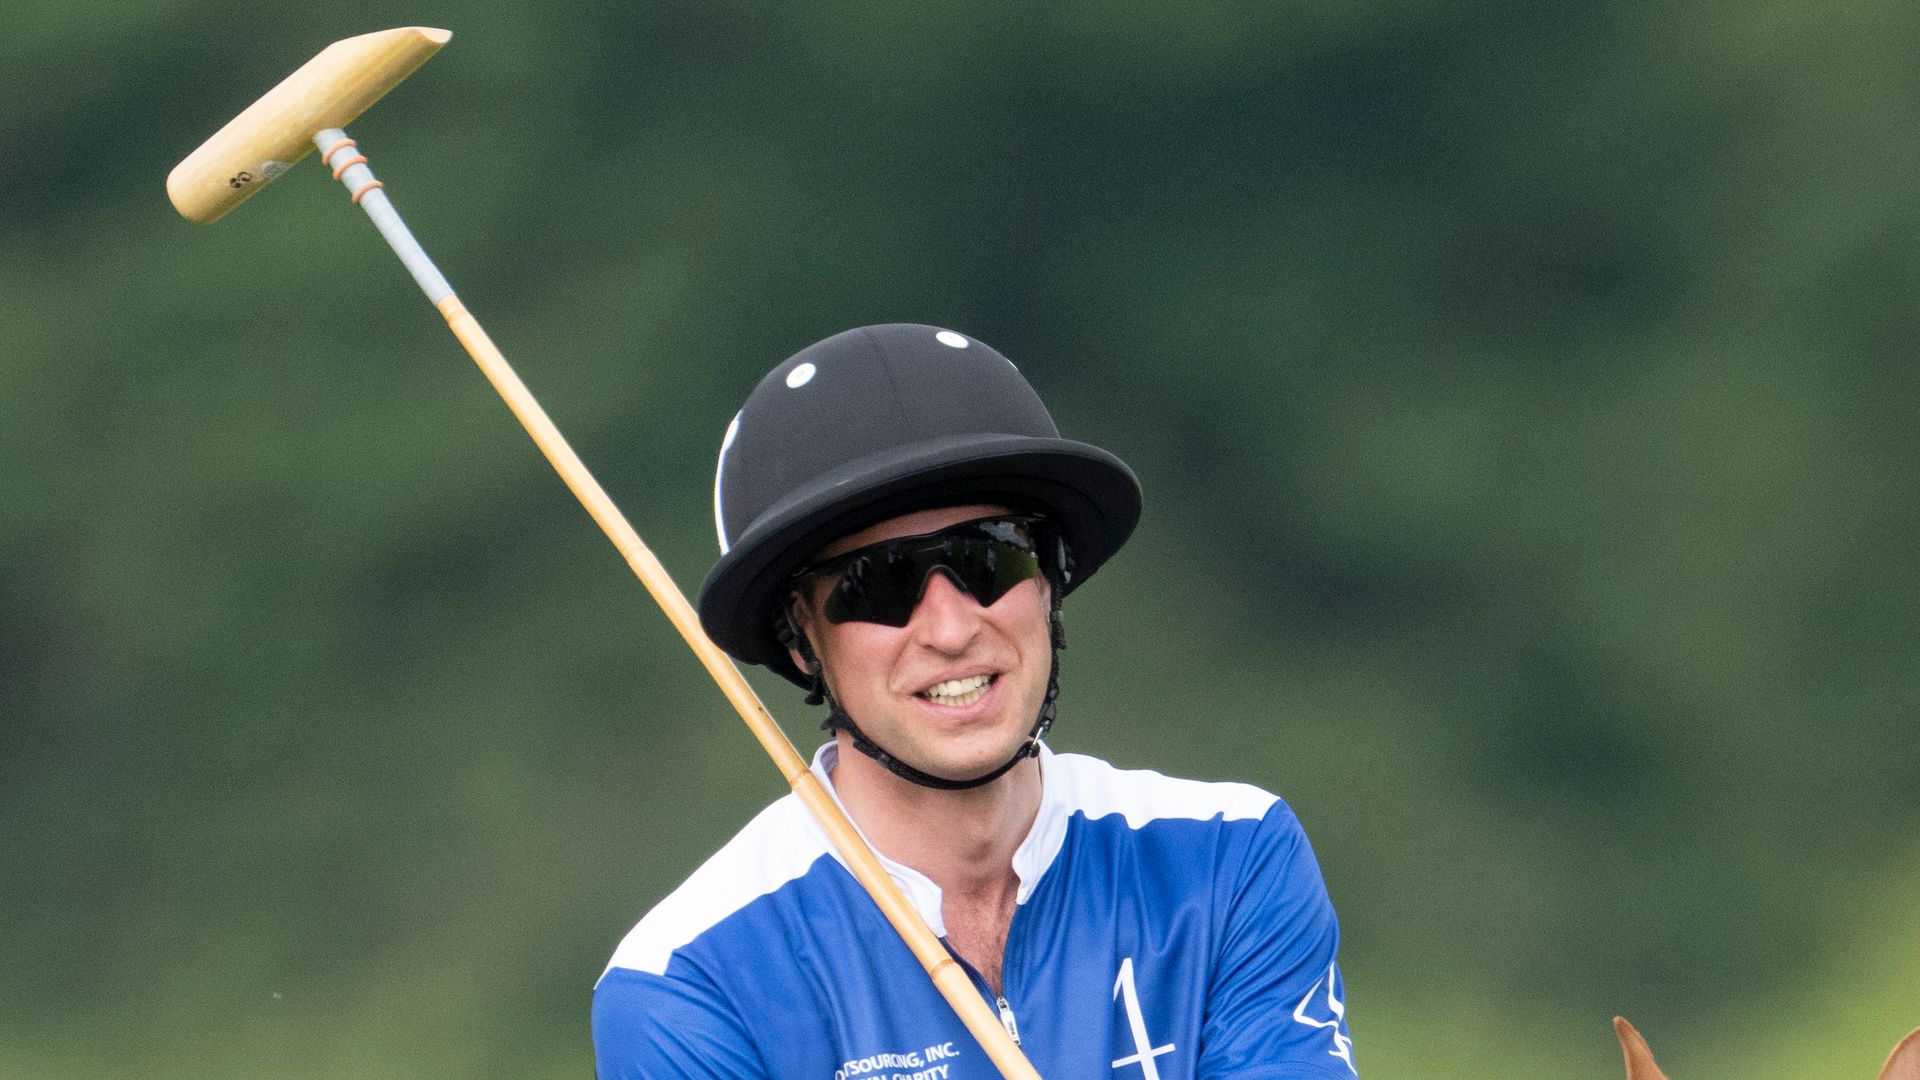 Prince William smiling while in polo uniform and holding a mallet